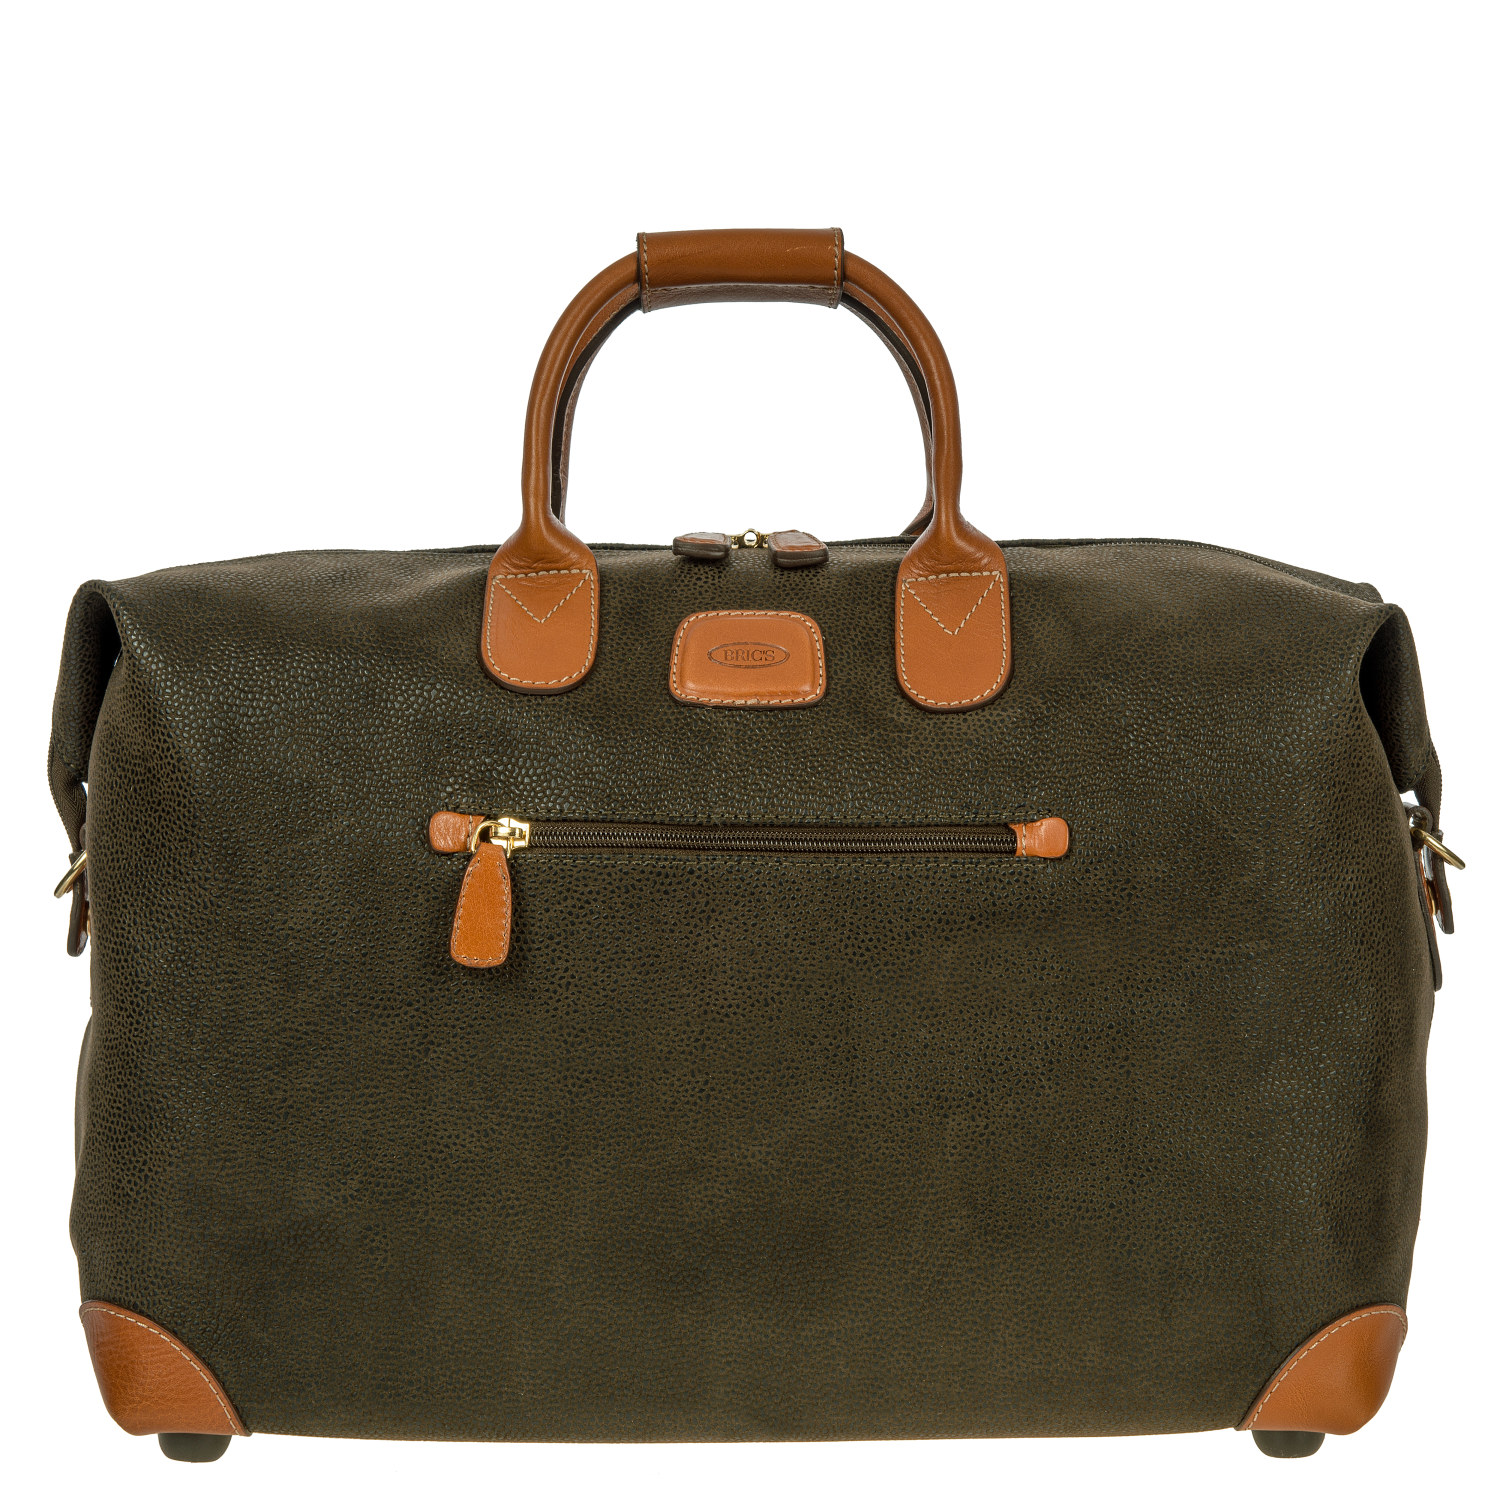 Life 18" Cargo Duffle by Brics (Color: Olive)